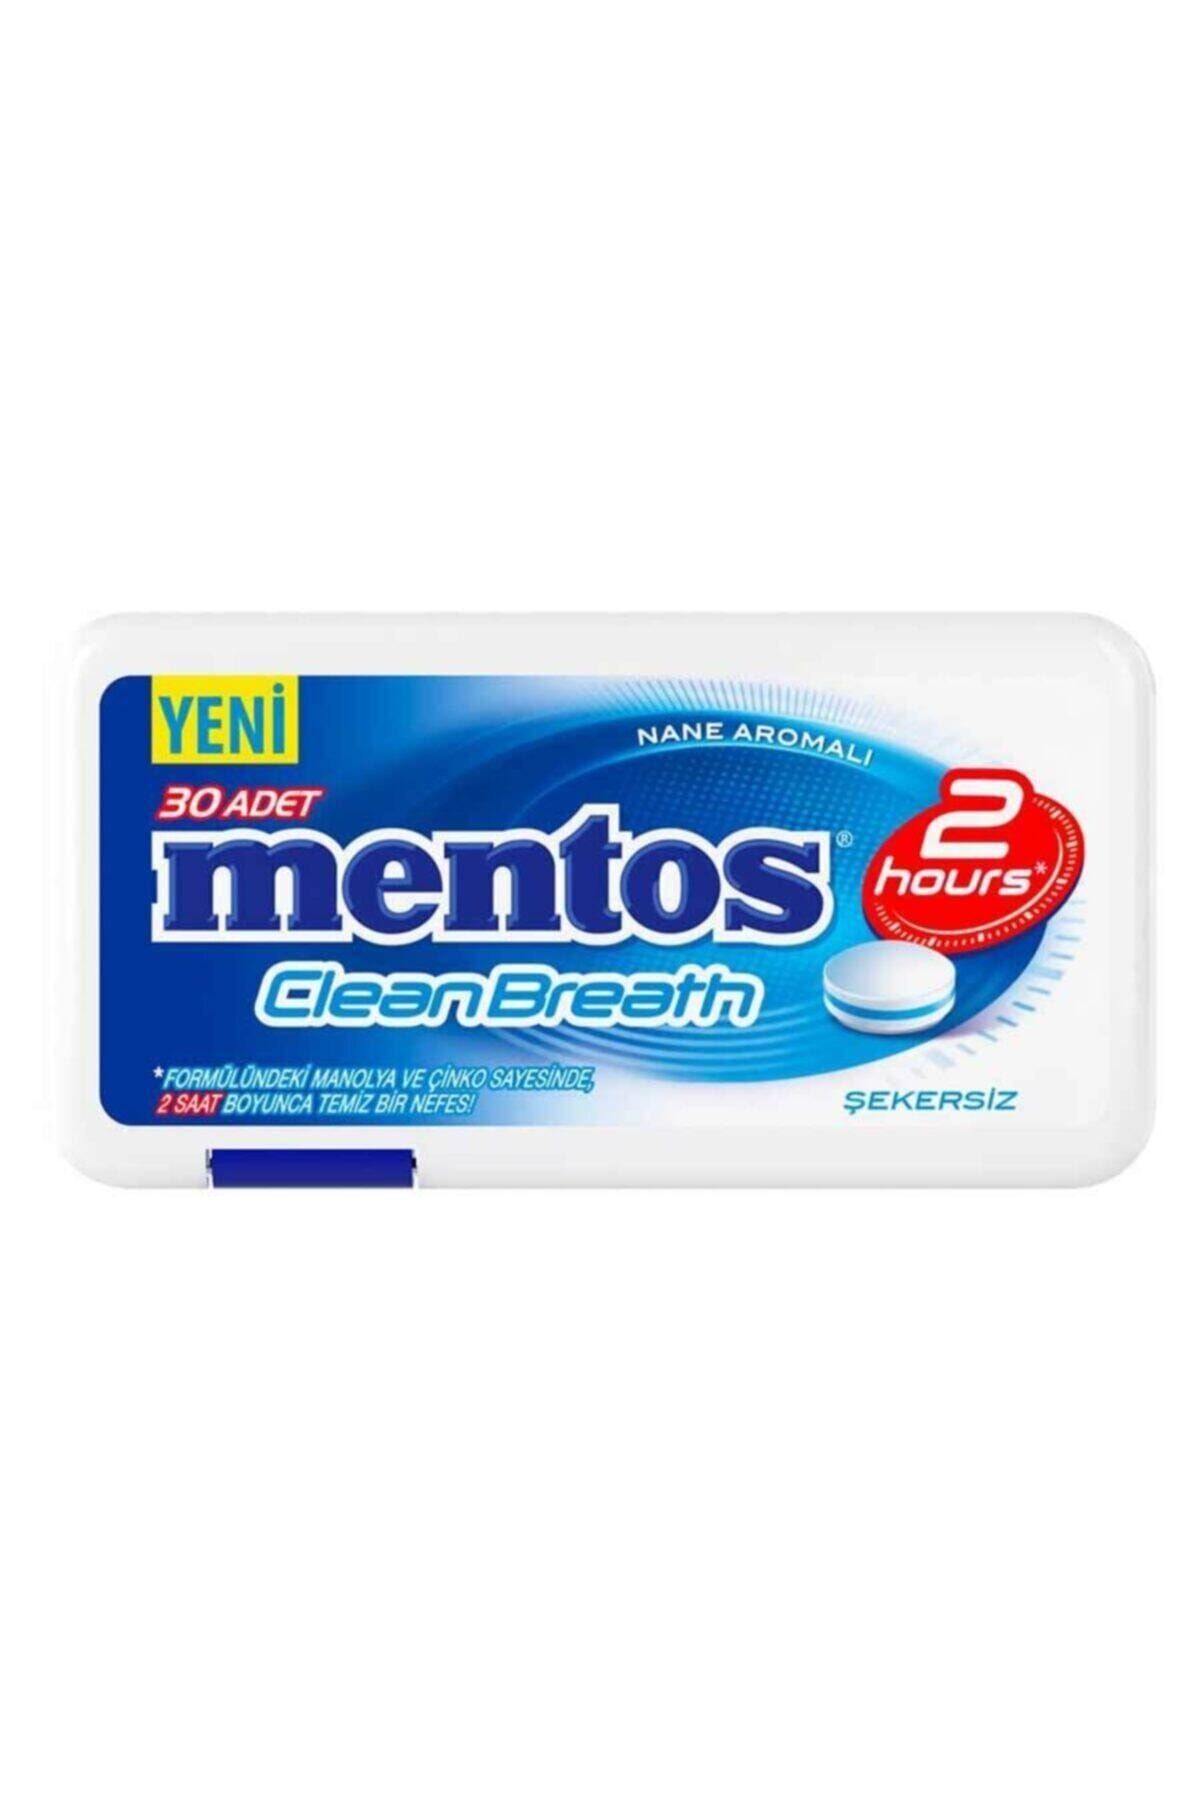 Mentos 2 Hours Cleanbreath